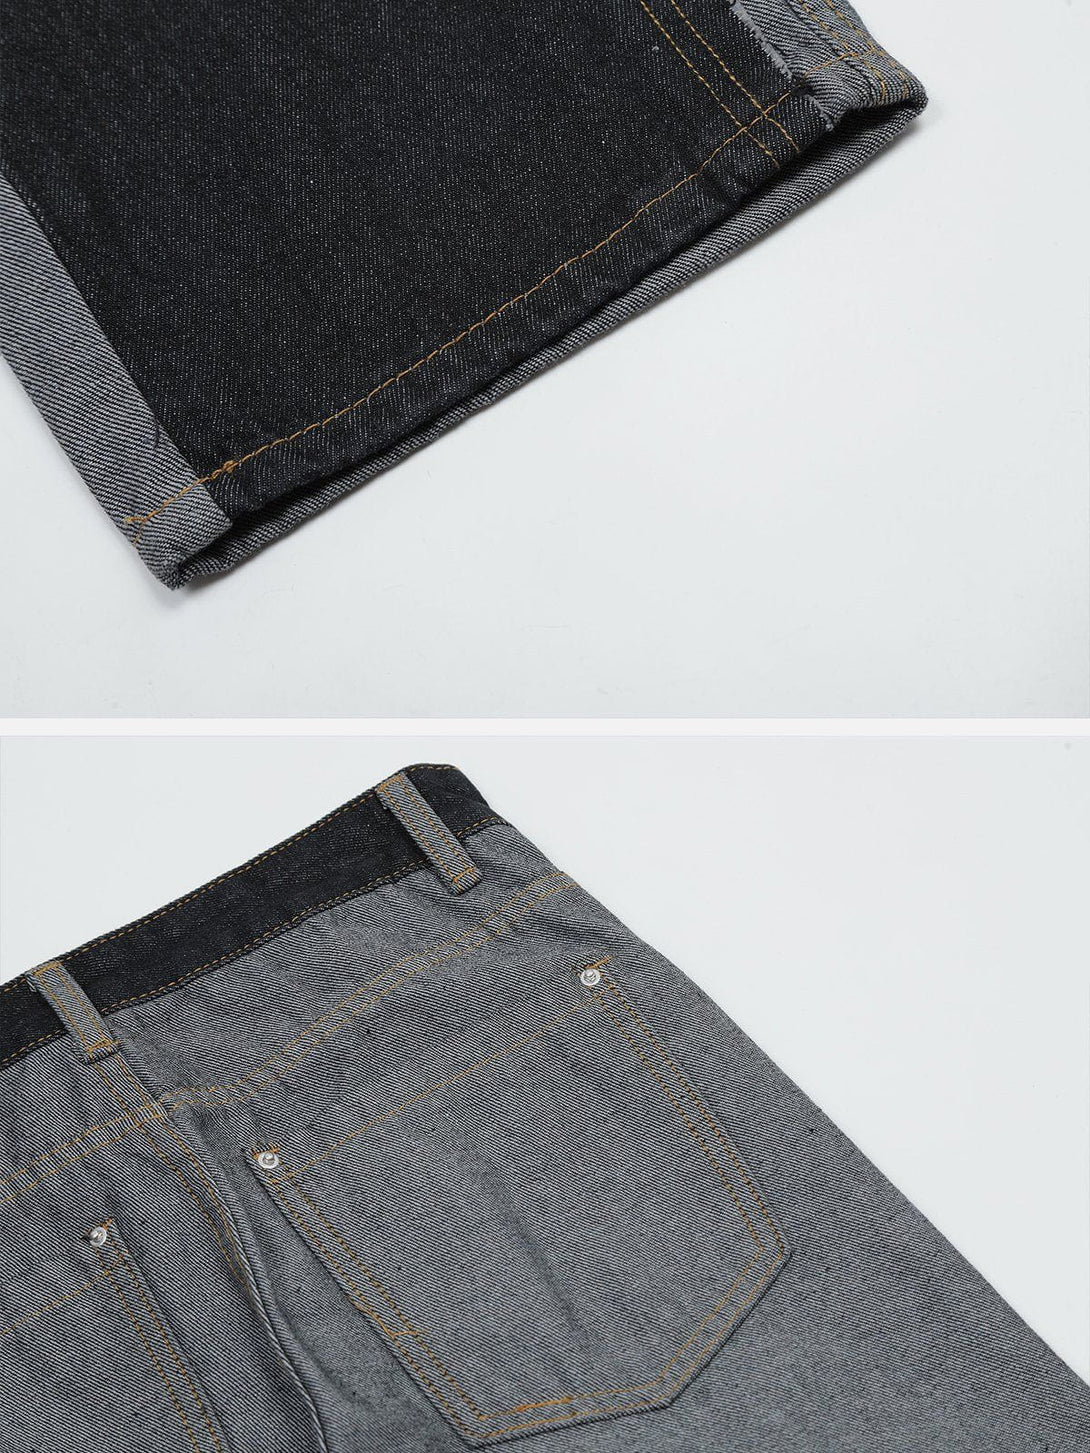 Levefly - Vintage Fake Two Piece Jeans - Streetwear Fashion - levefly.com